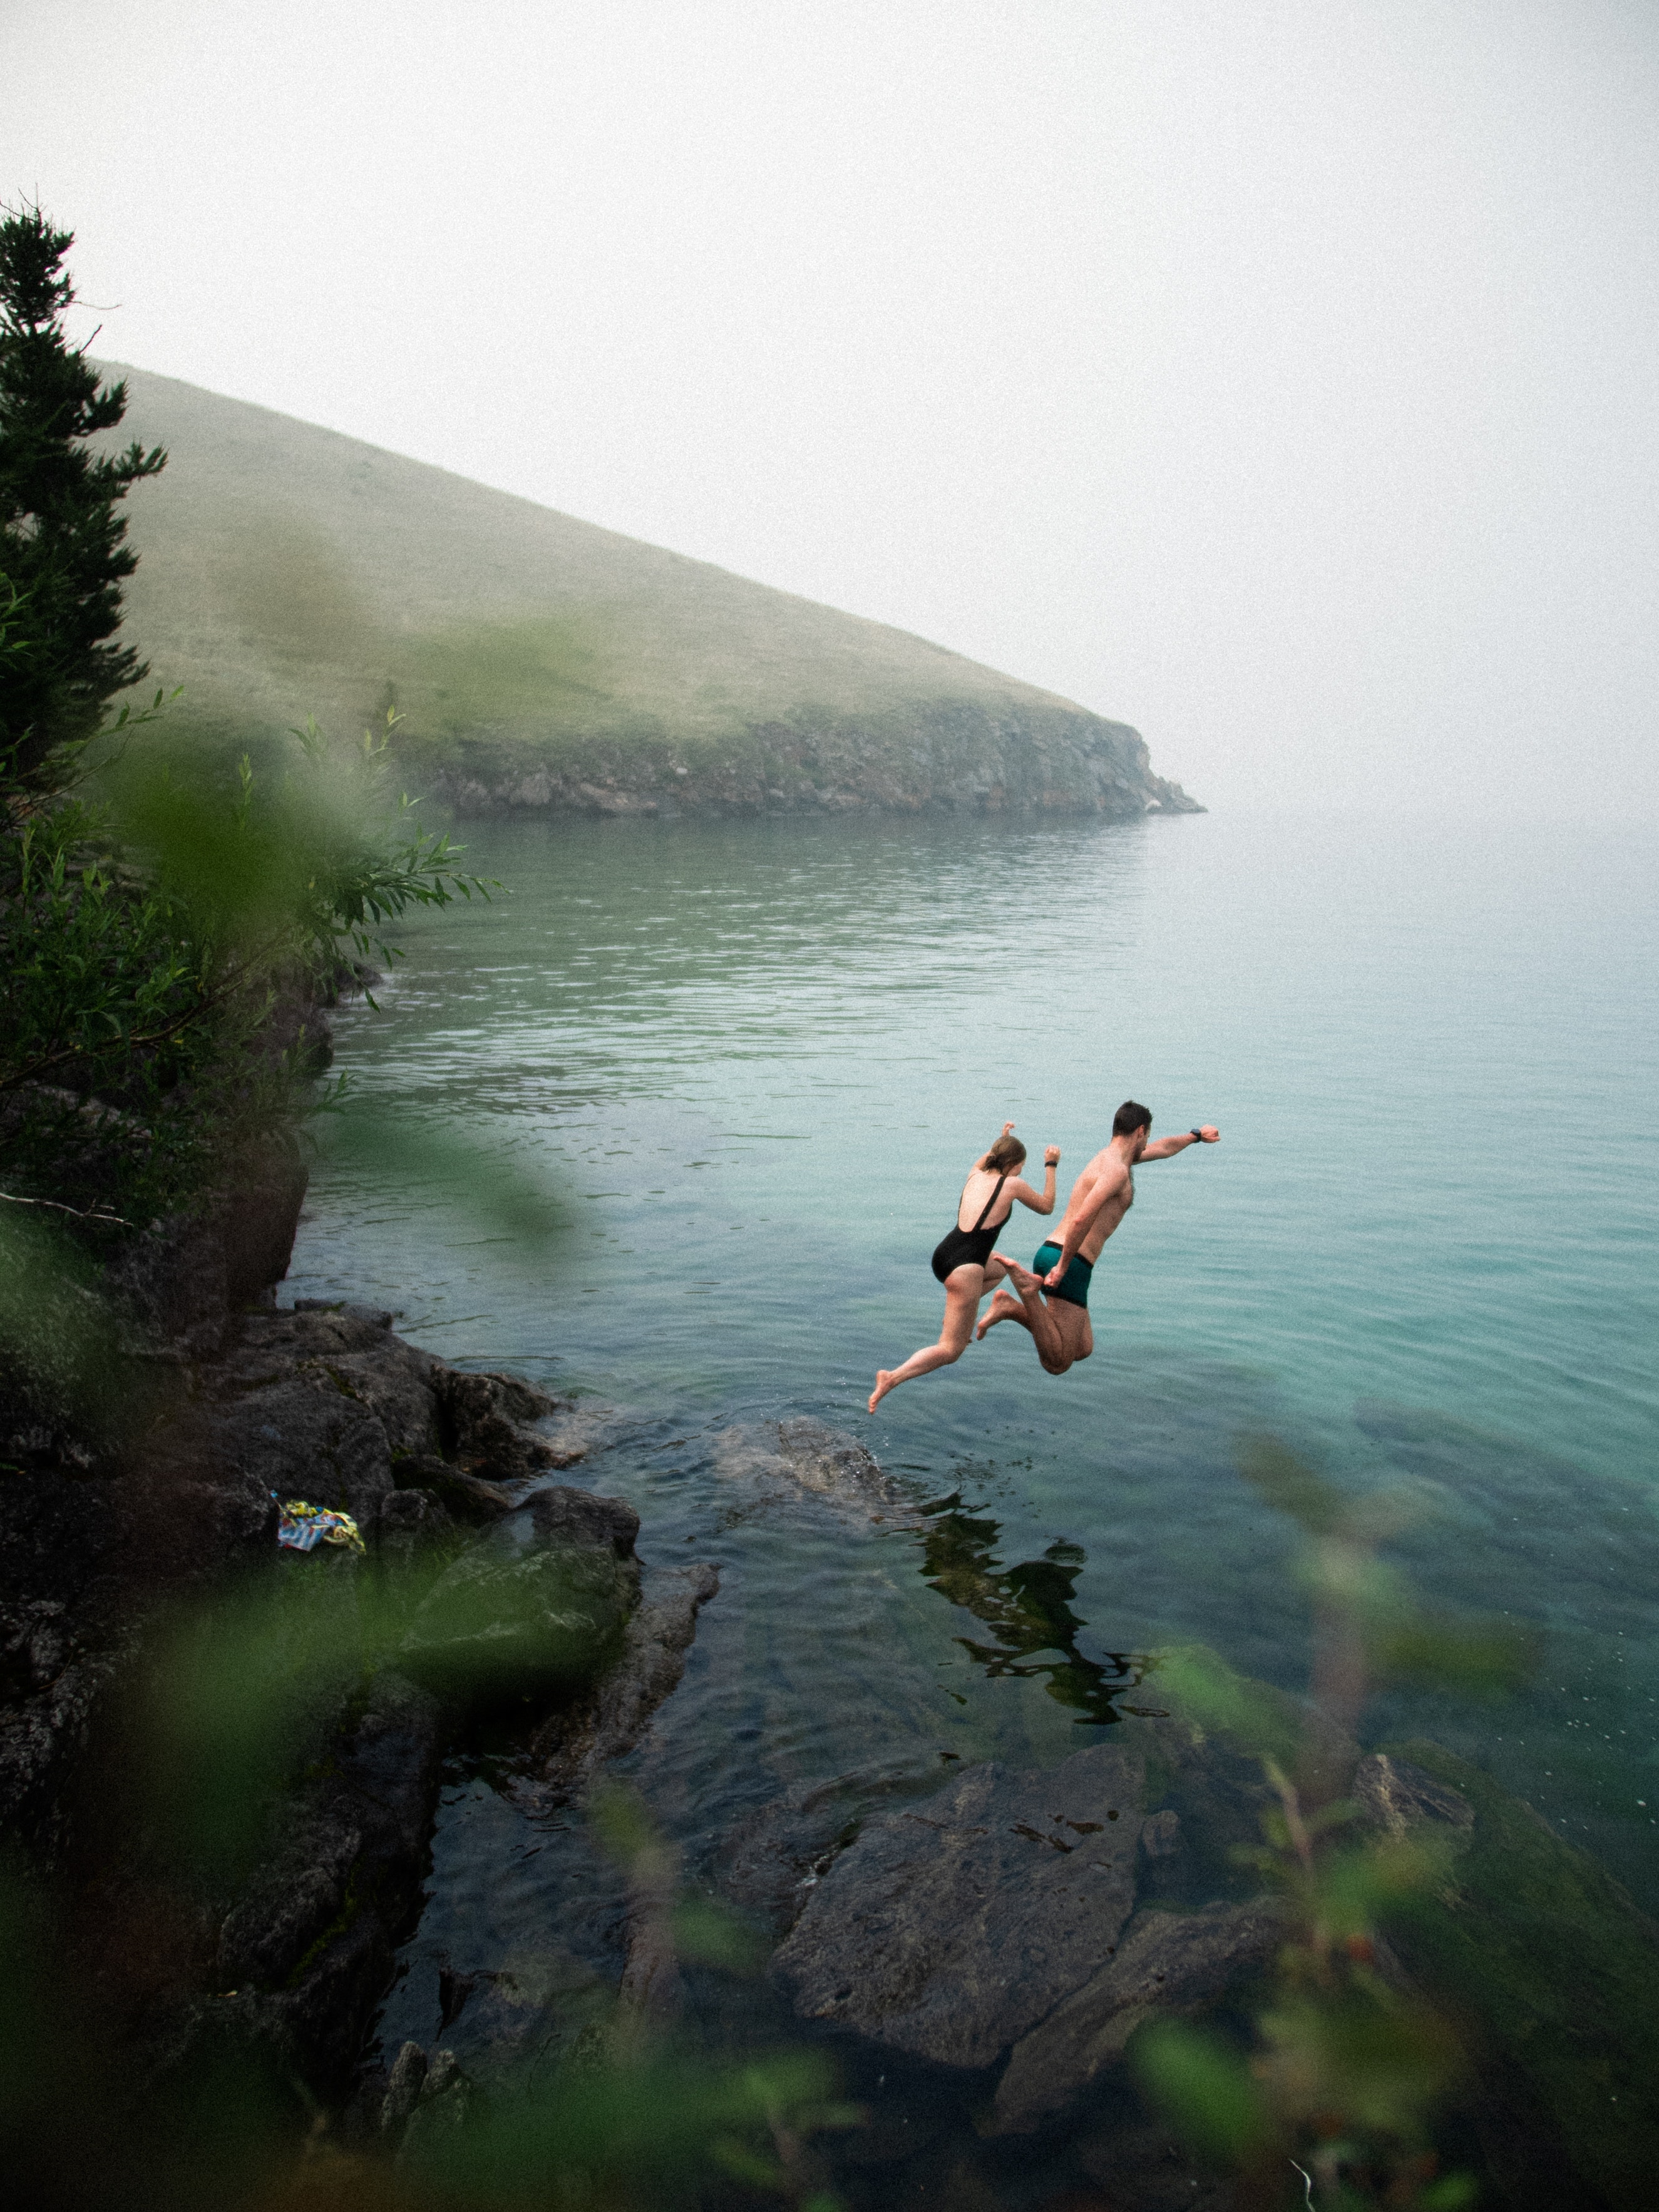 Two individuals jumping into water. | Source: Pexels